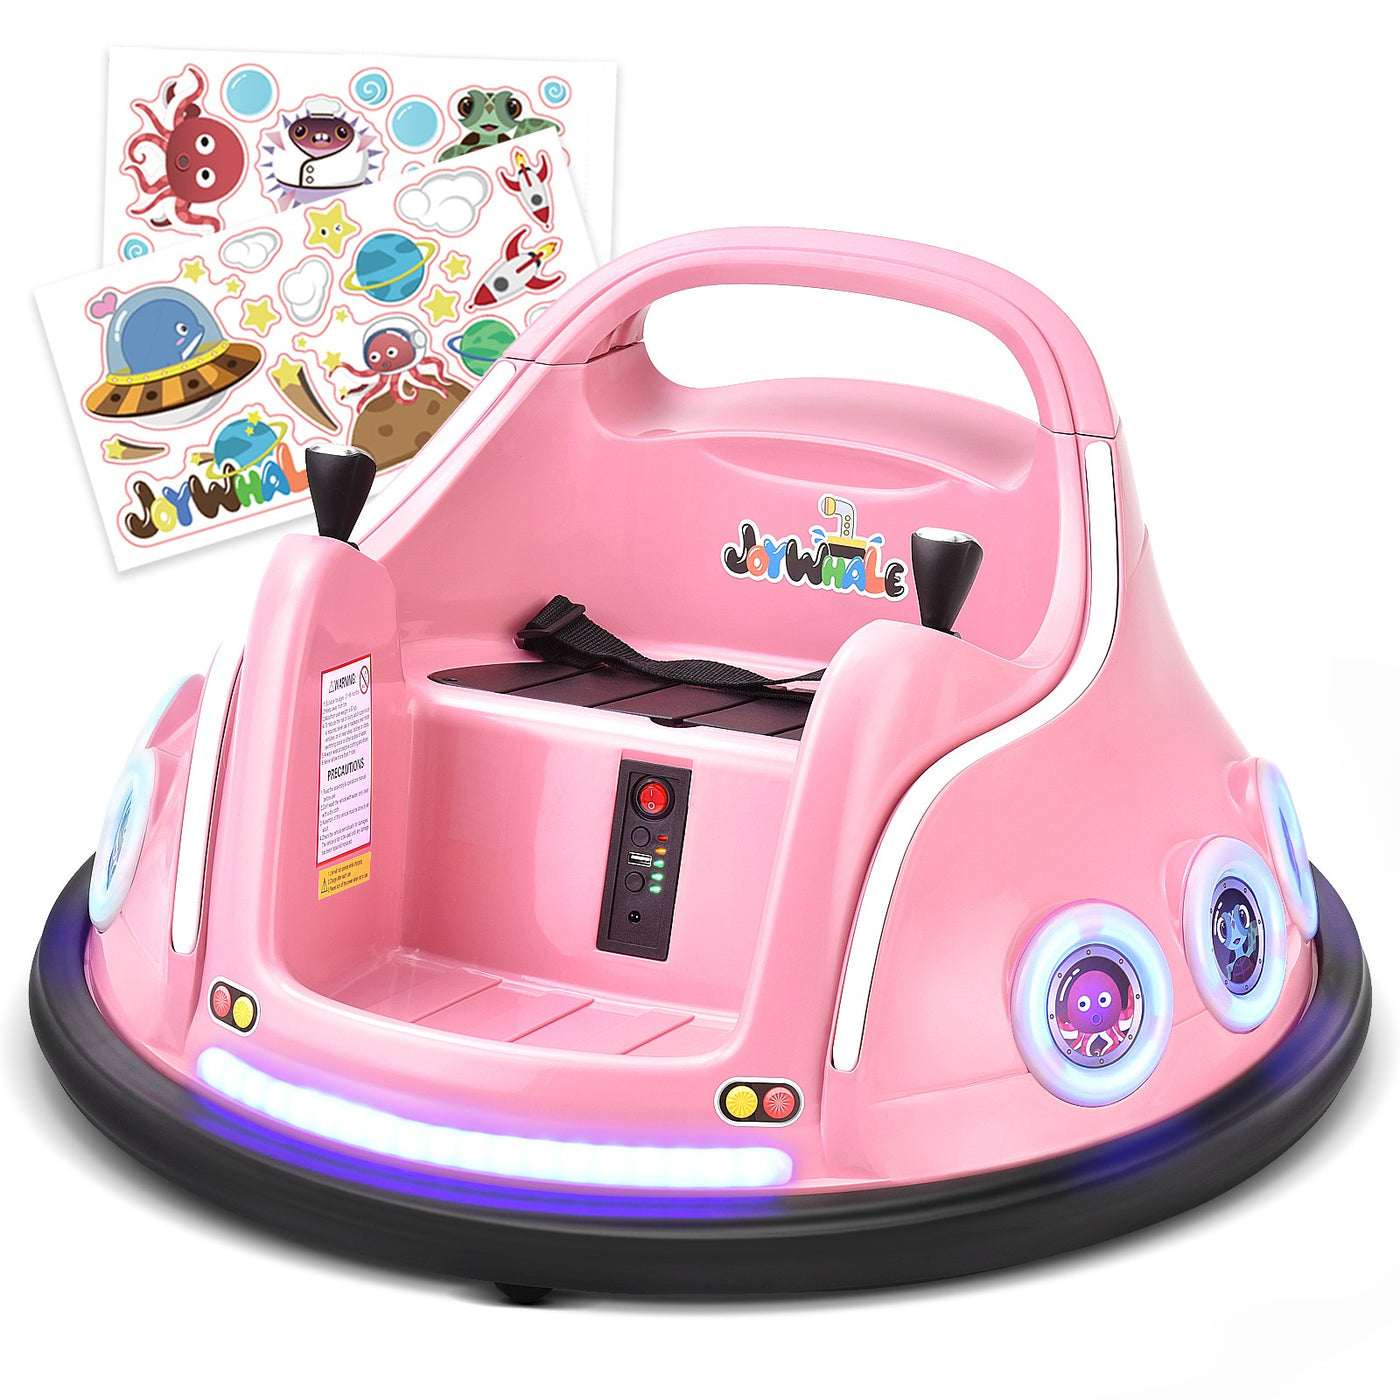 Joywhale 12V Kids Ride on Bumper Car, with 2.4G Remote Control, Exquisite DIY Sticker, Breathing lights, DP-010